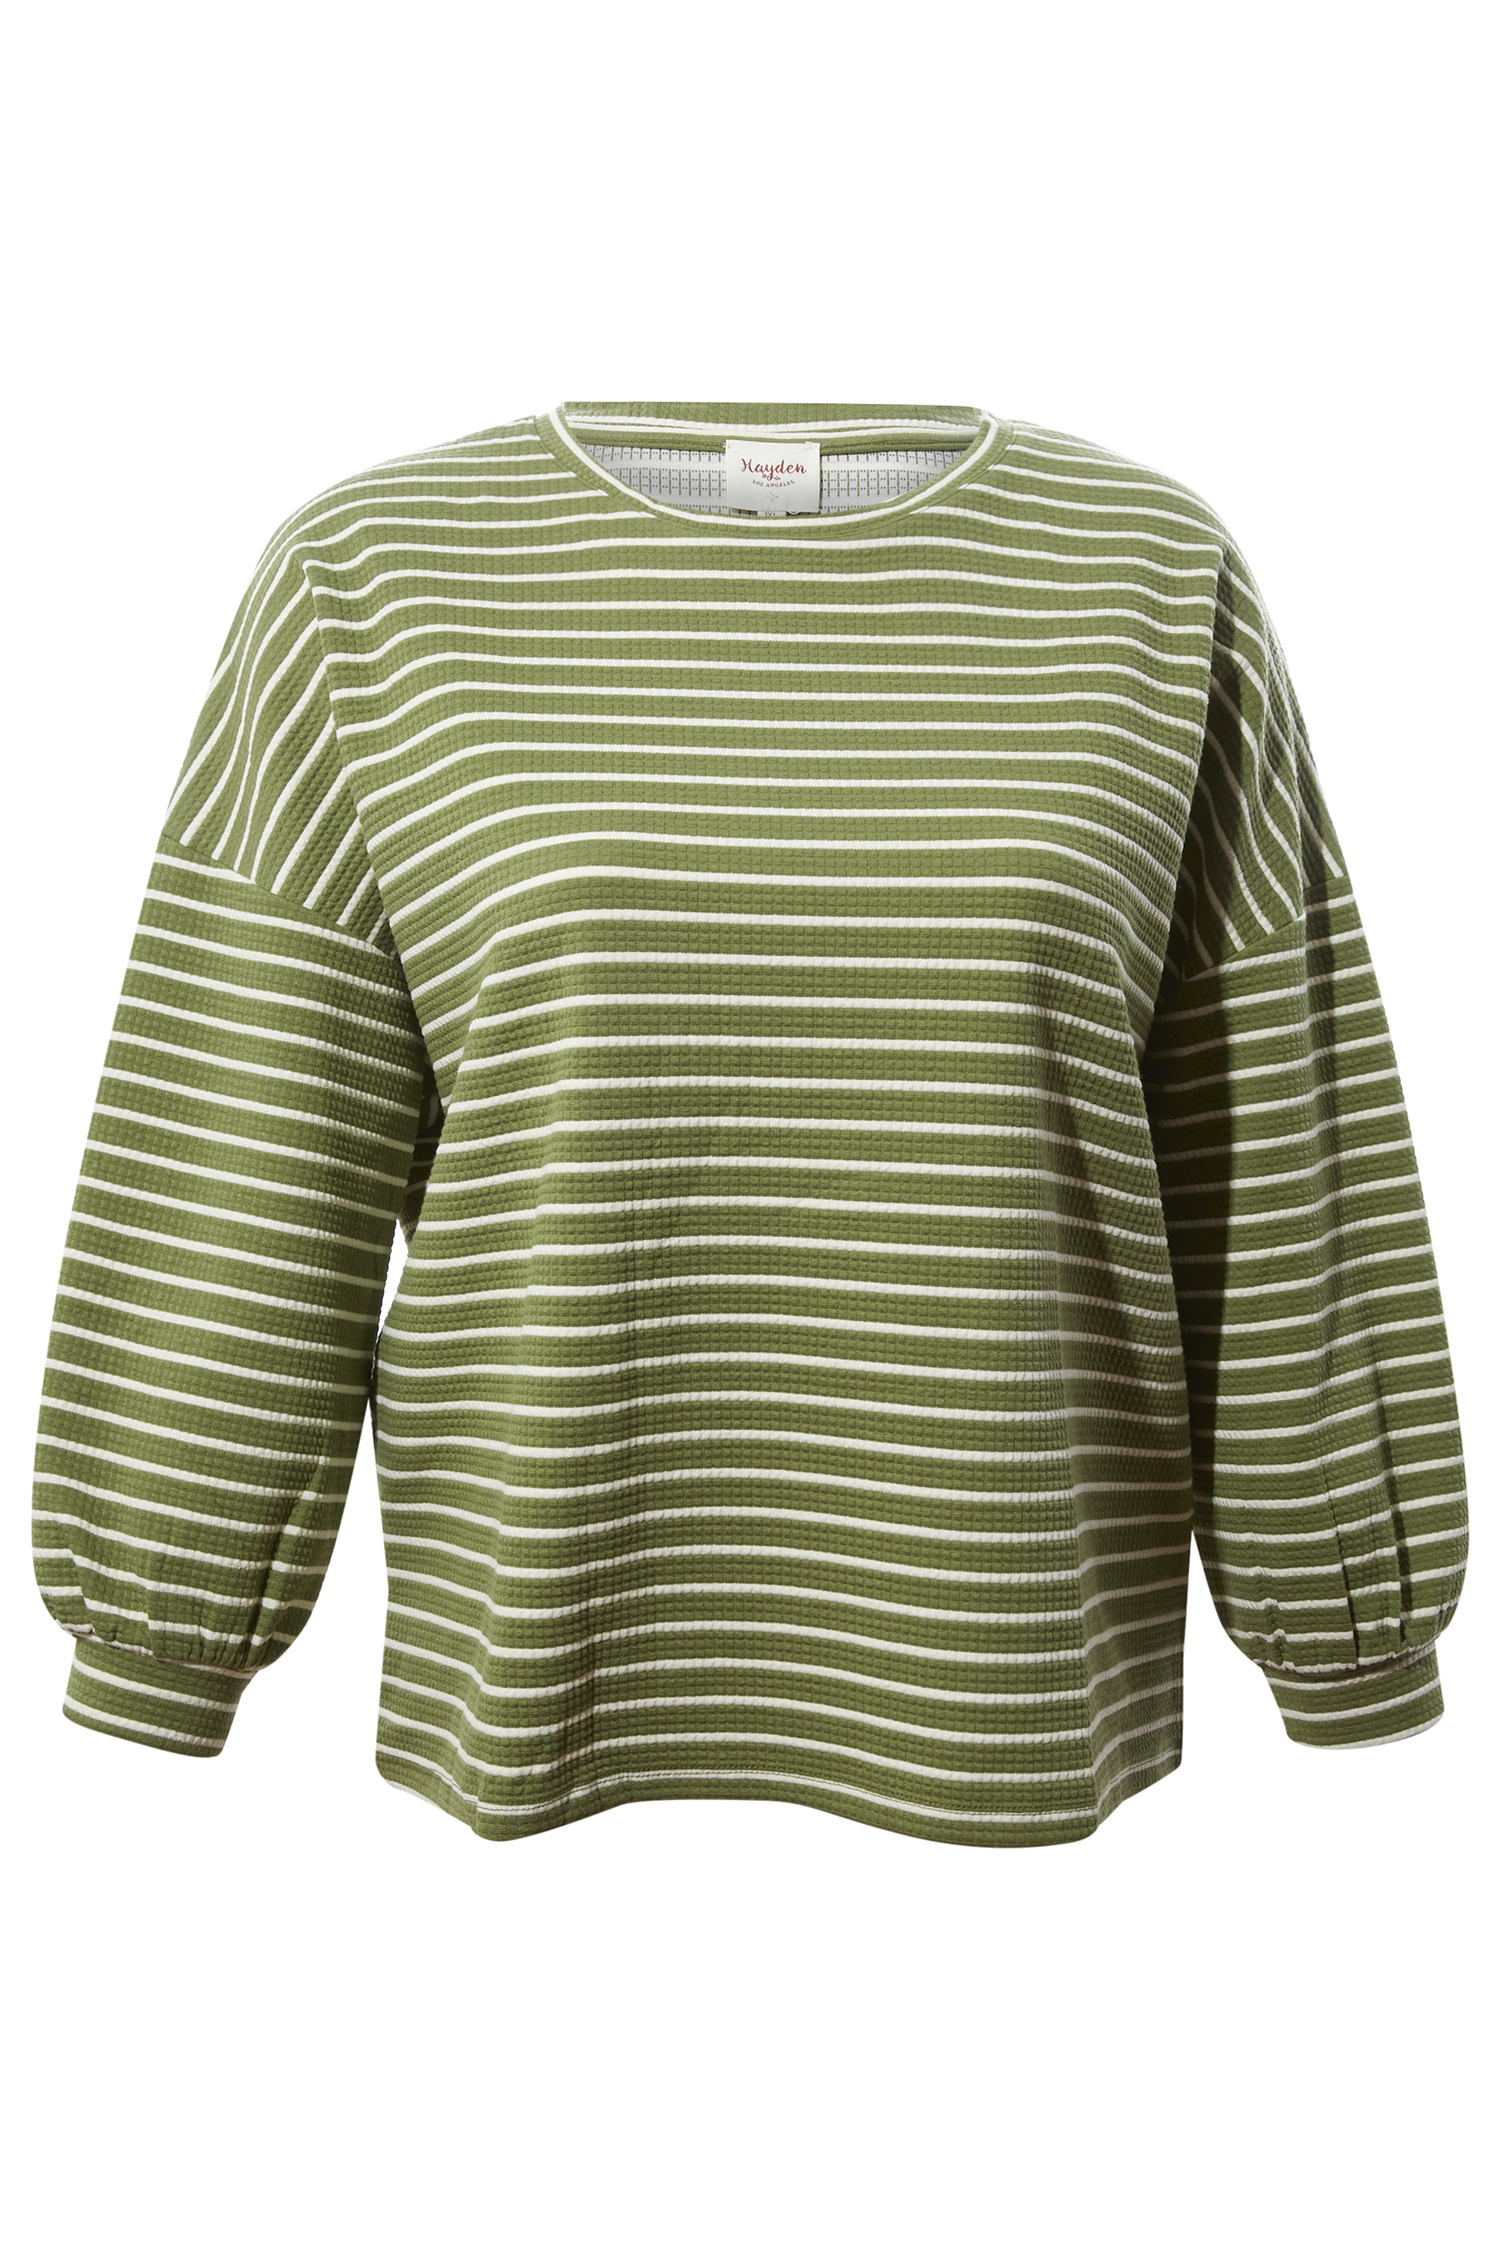 Long Sleeve Striped T-Shirt in Sage 1X - 3X | DAILYLOOK